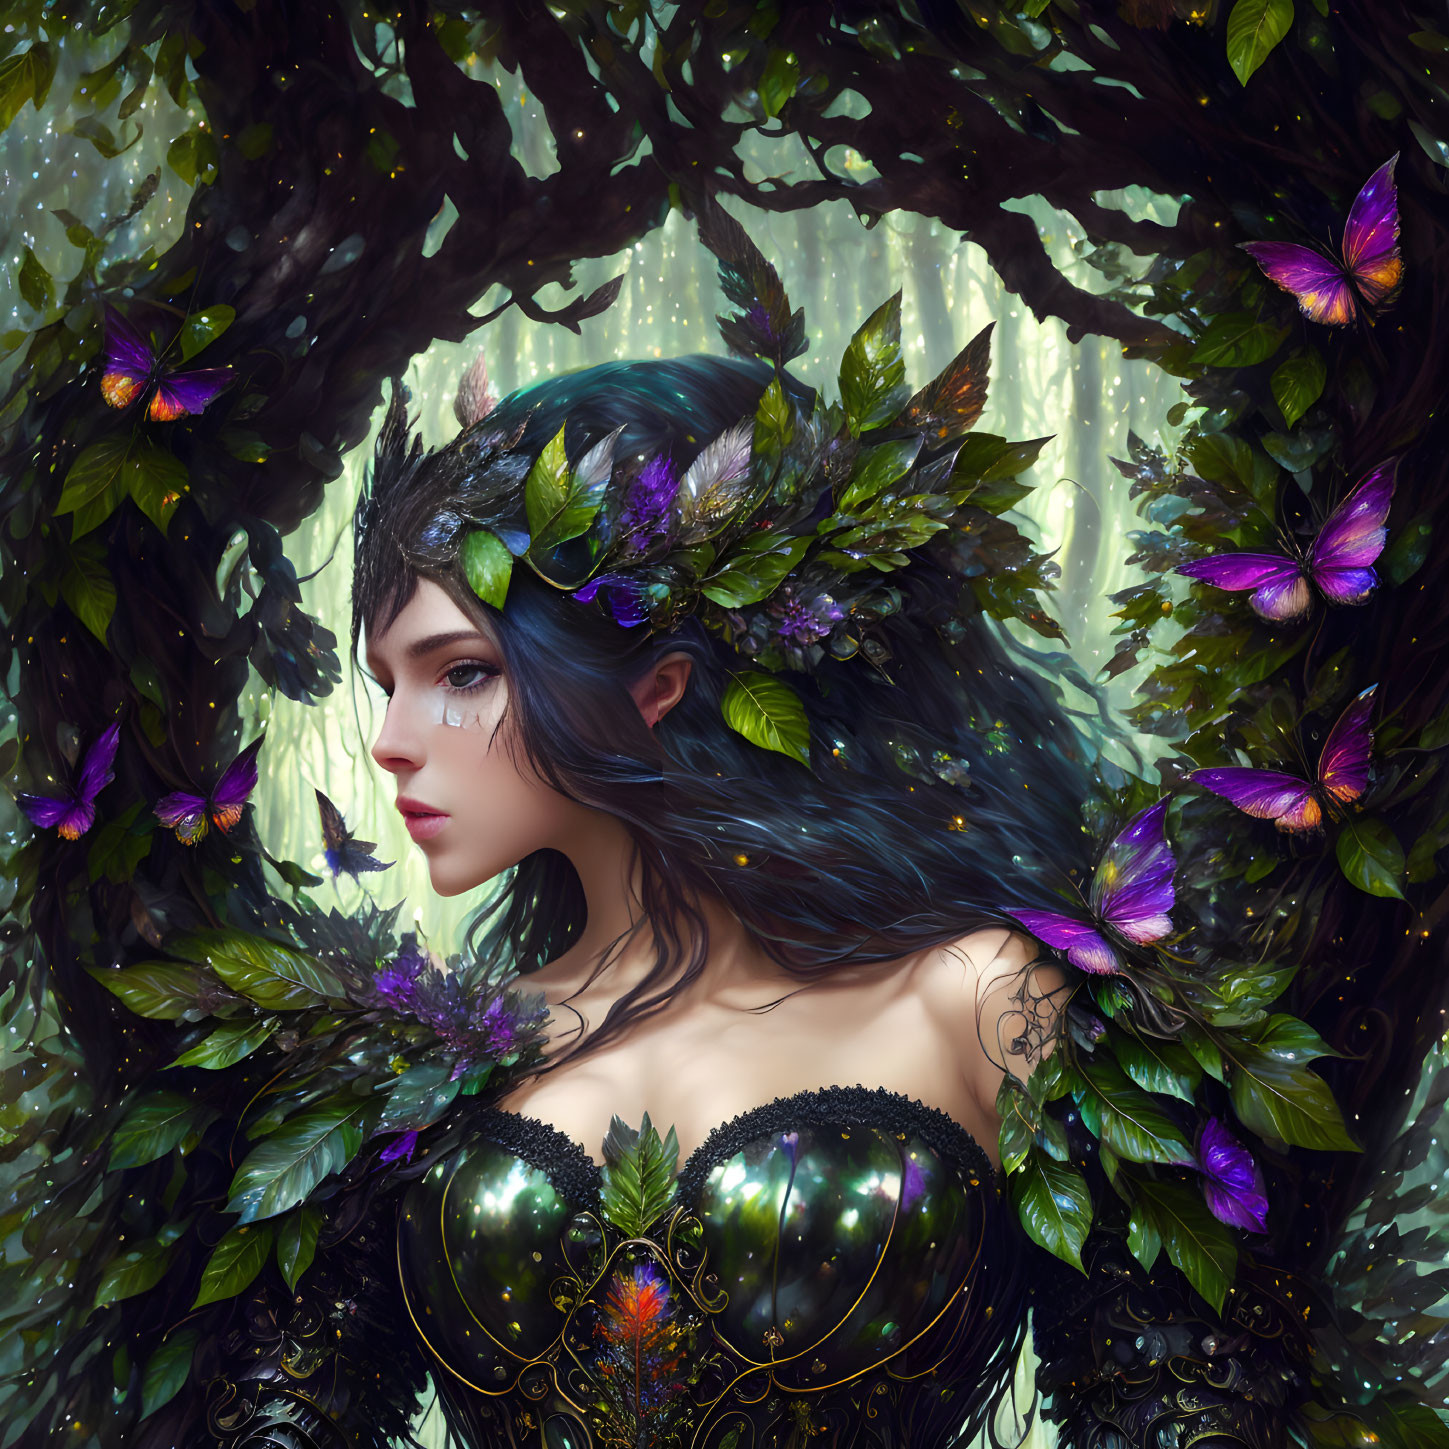 Mystical woman with butterflies and foliage, fantasy forest theme